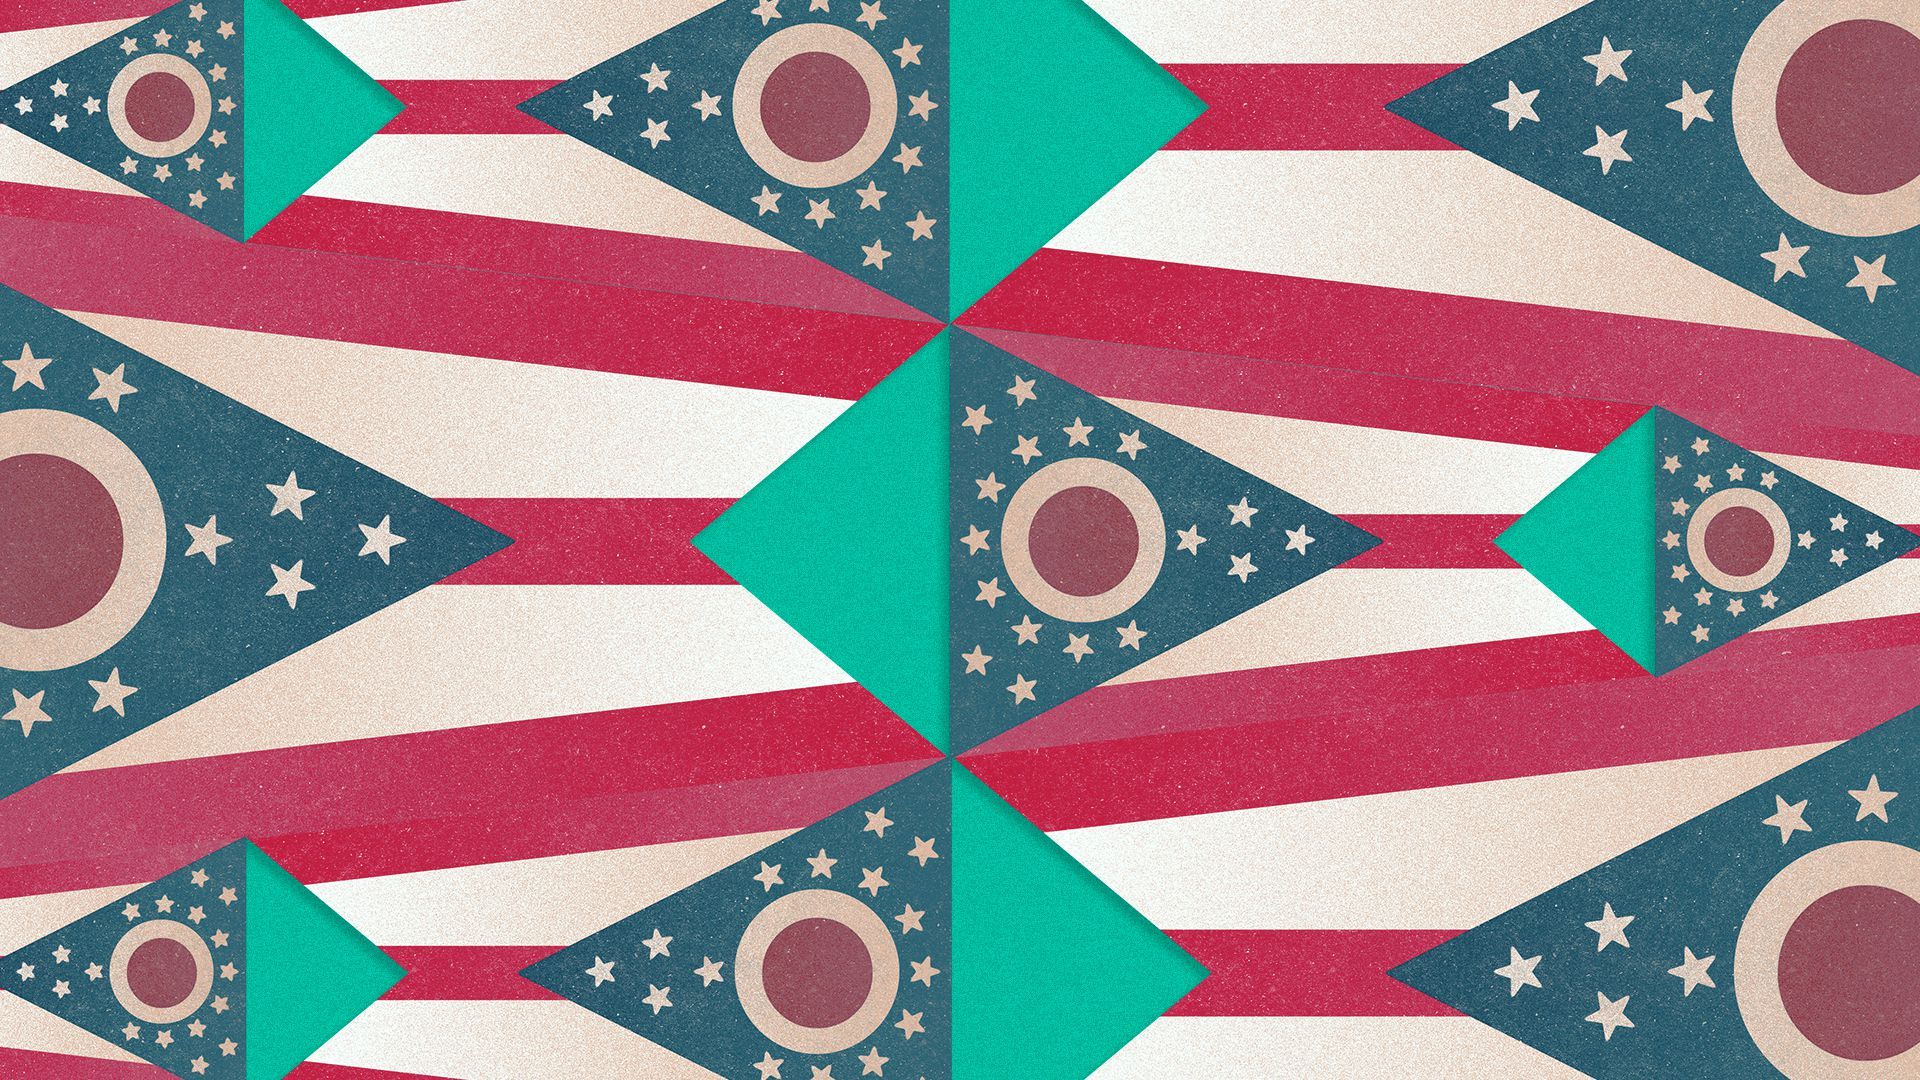 Illustration of a pattern made up of several copies of the Ohio flag.